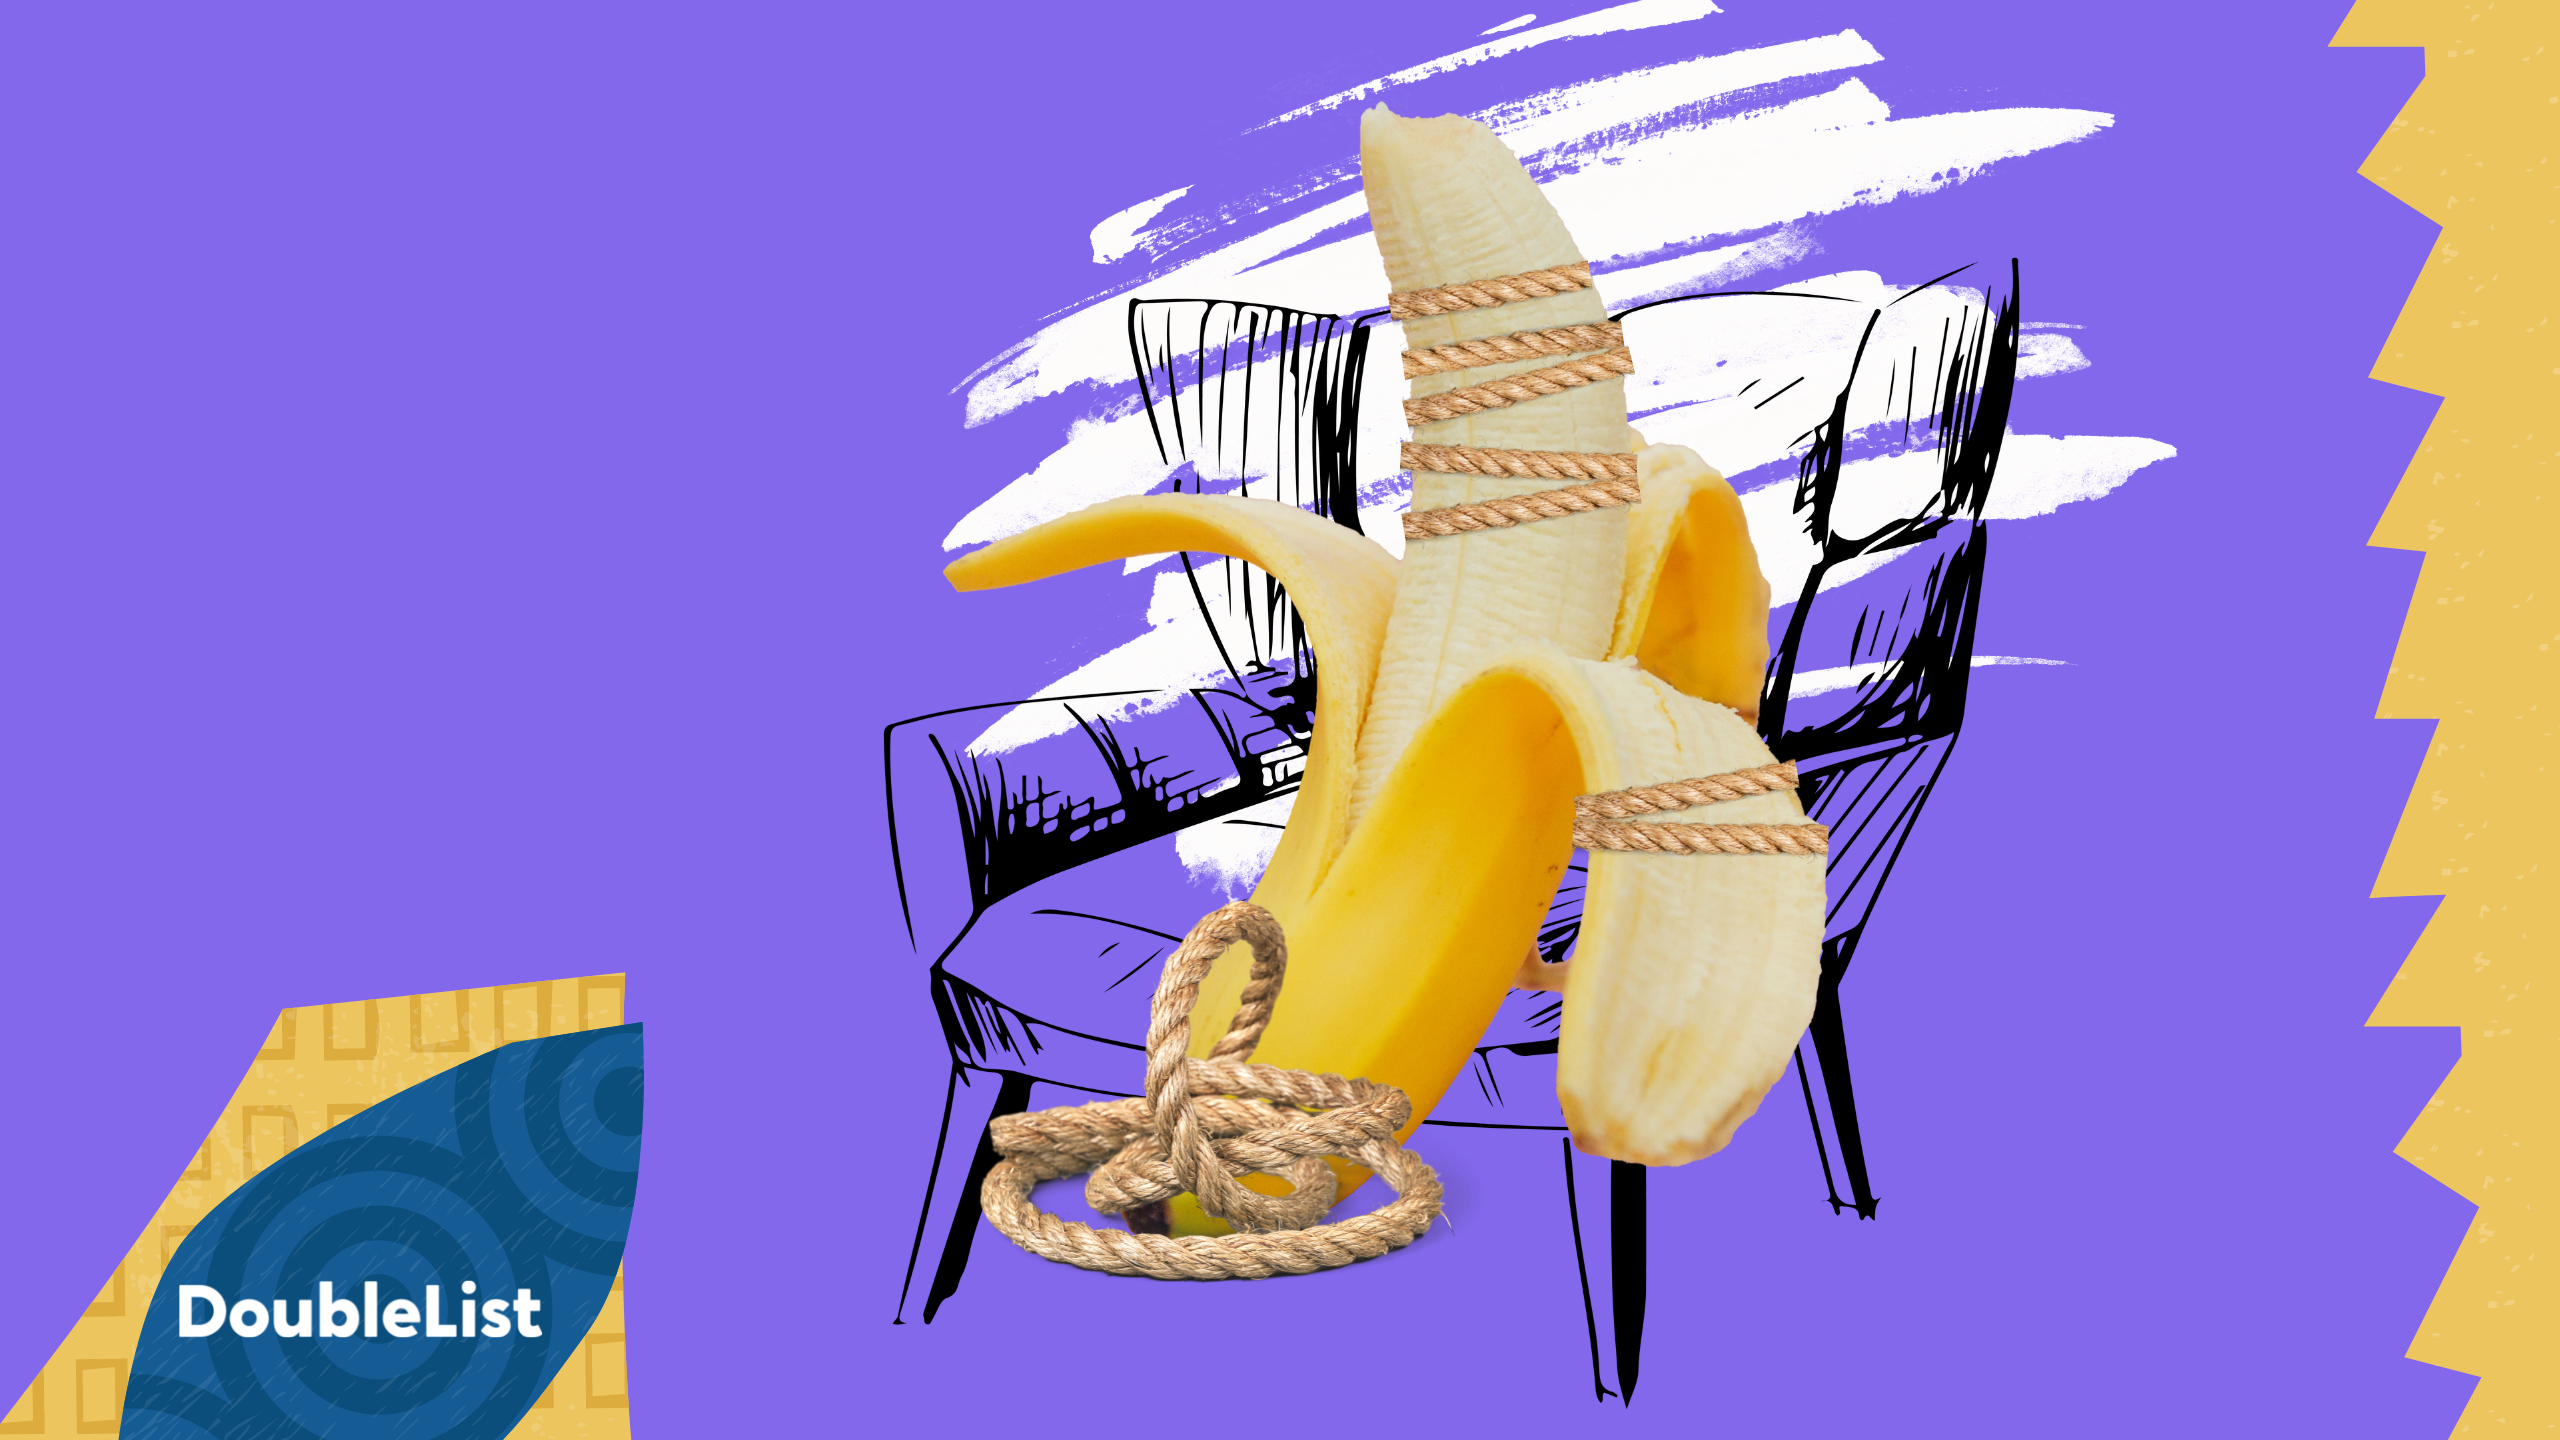 DoubleList graphic of a tied up banana on a sketched chair against a colorful backdrop symbolizing BDSM.